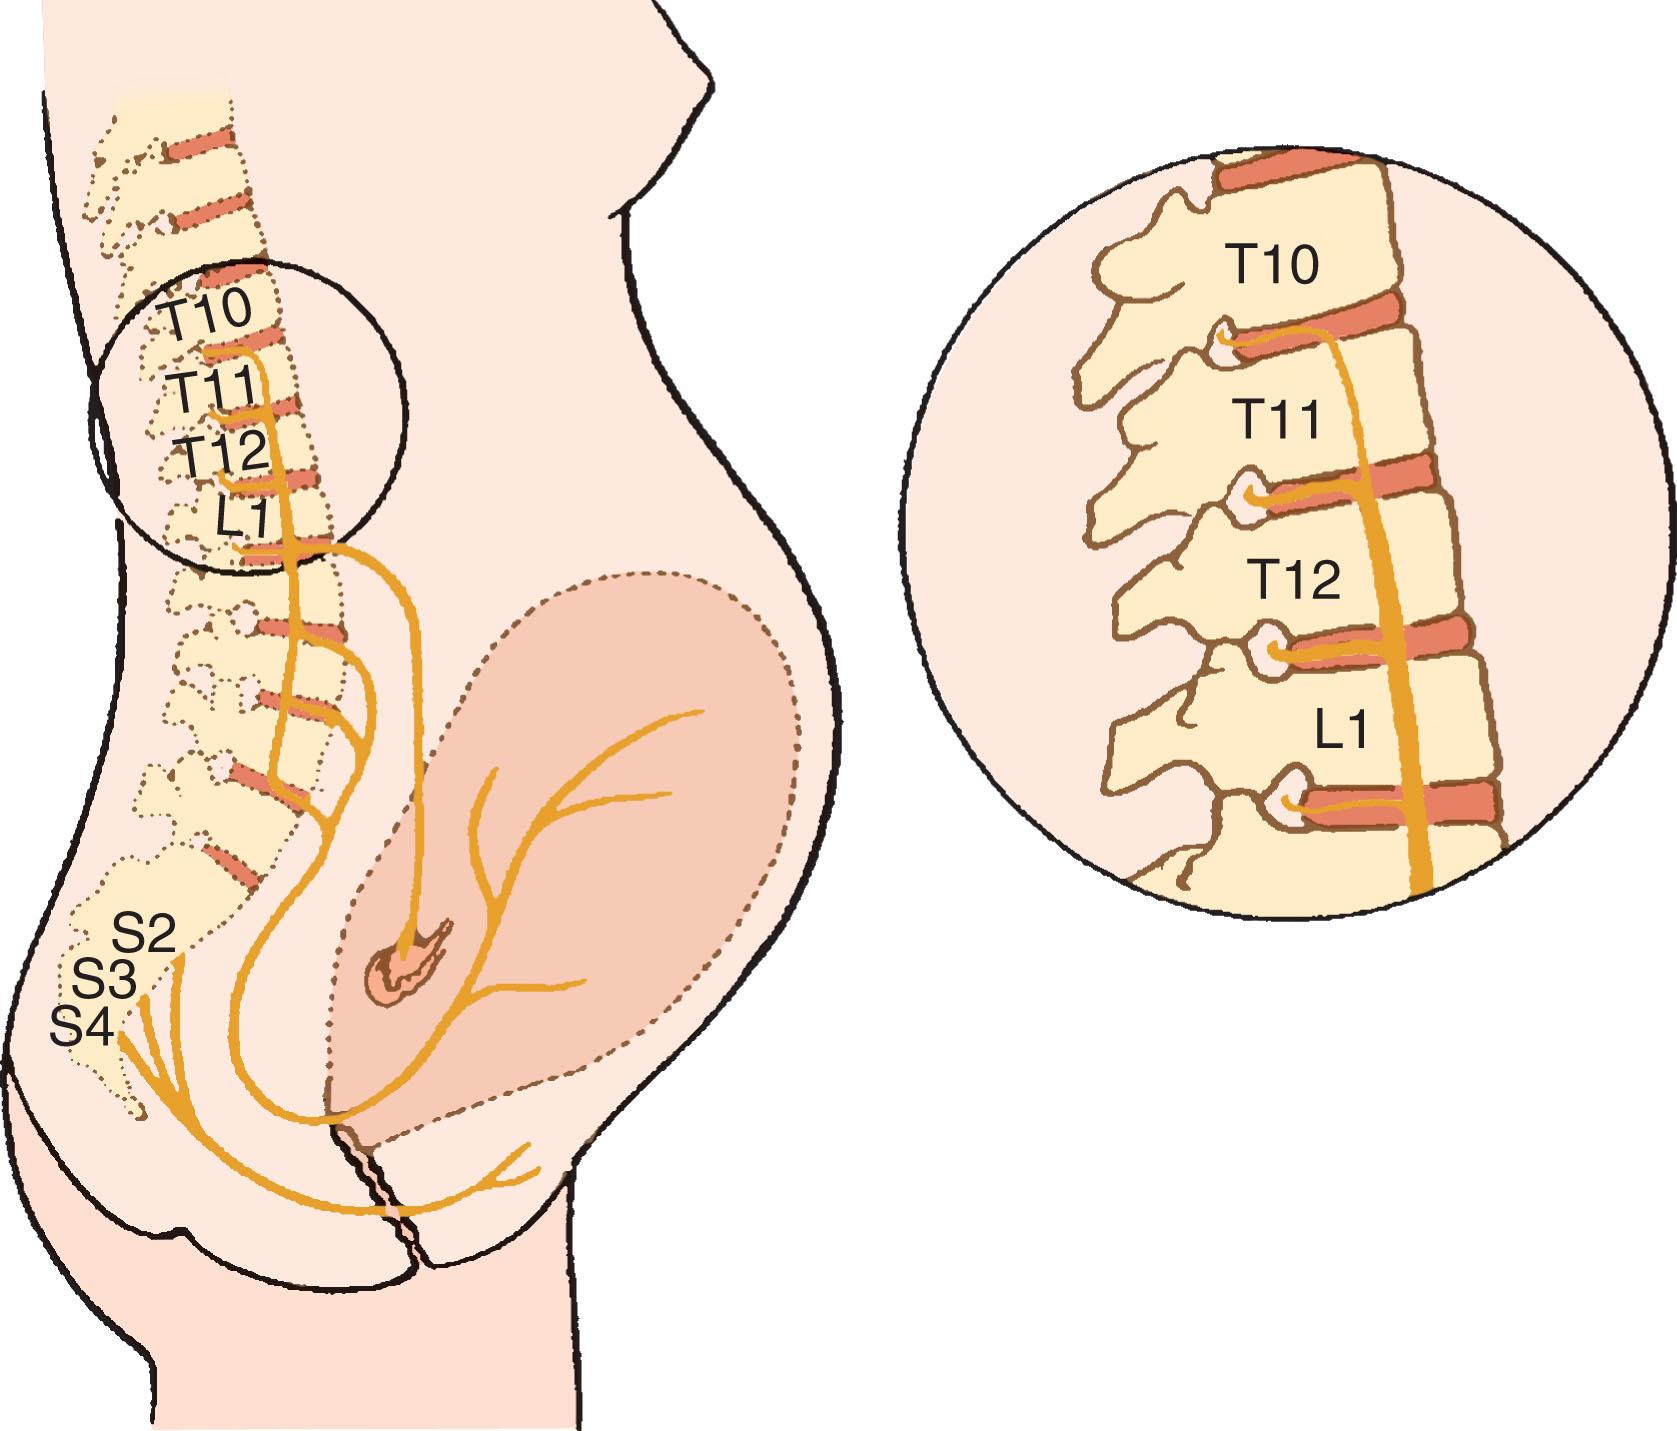 Fig. 14.1, Parturition pain pathways. Nerves that accompany sympathetic fibers and enter the neuraxis at the T10, T11, T12, and L1 spinal levels carry afferent pain impulses from the cervix and uterus. Pain pathways from the perineum travel to S2, S3, and S4 via the pudendal nerve.